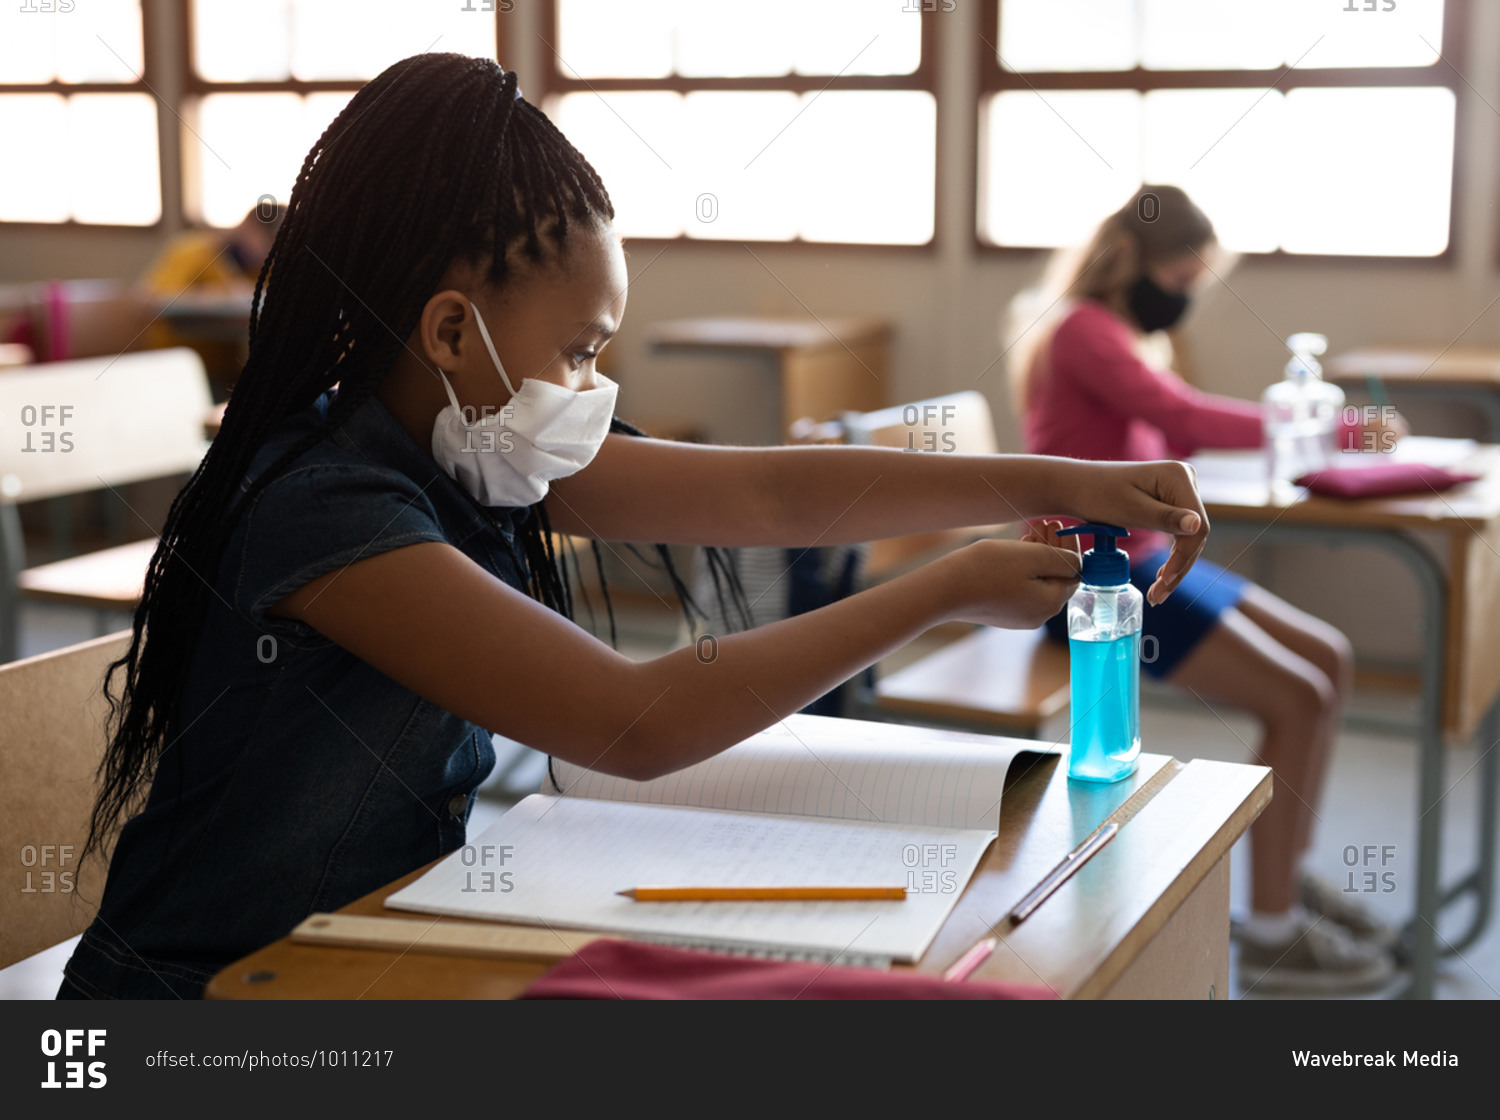 Mixed race girl wearing face mask, sanitizing her hands while sitting on her desk at classroom. Primary education social distancing health safety during Covid19 Coronavirus pandemic.